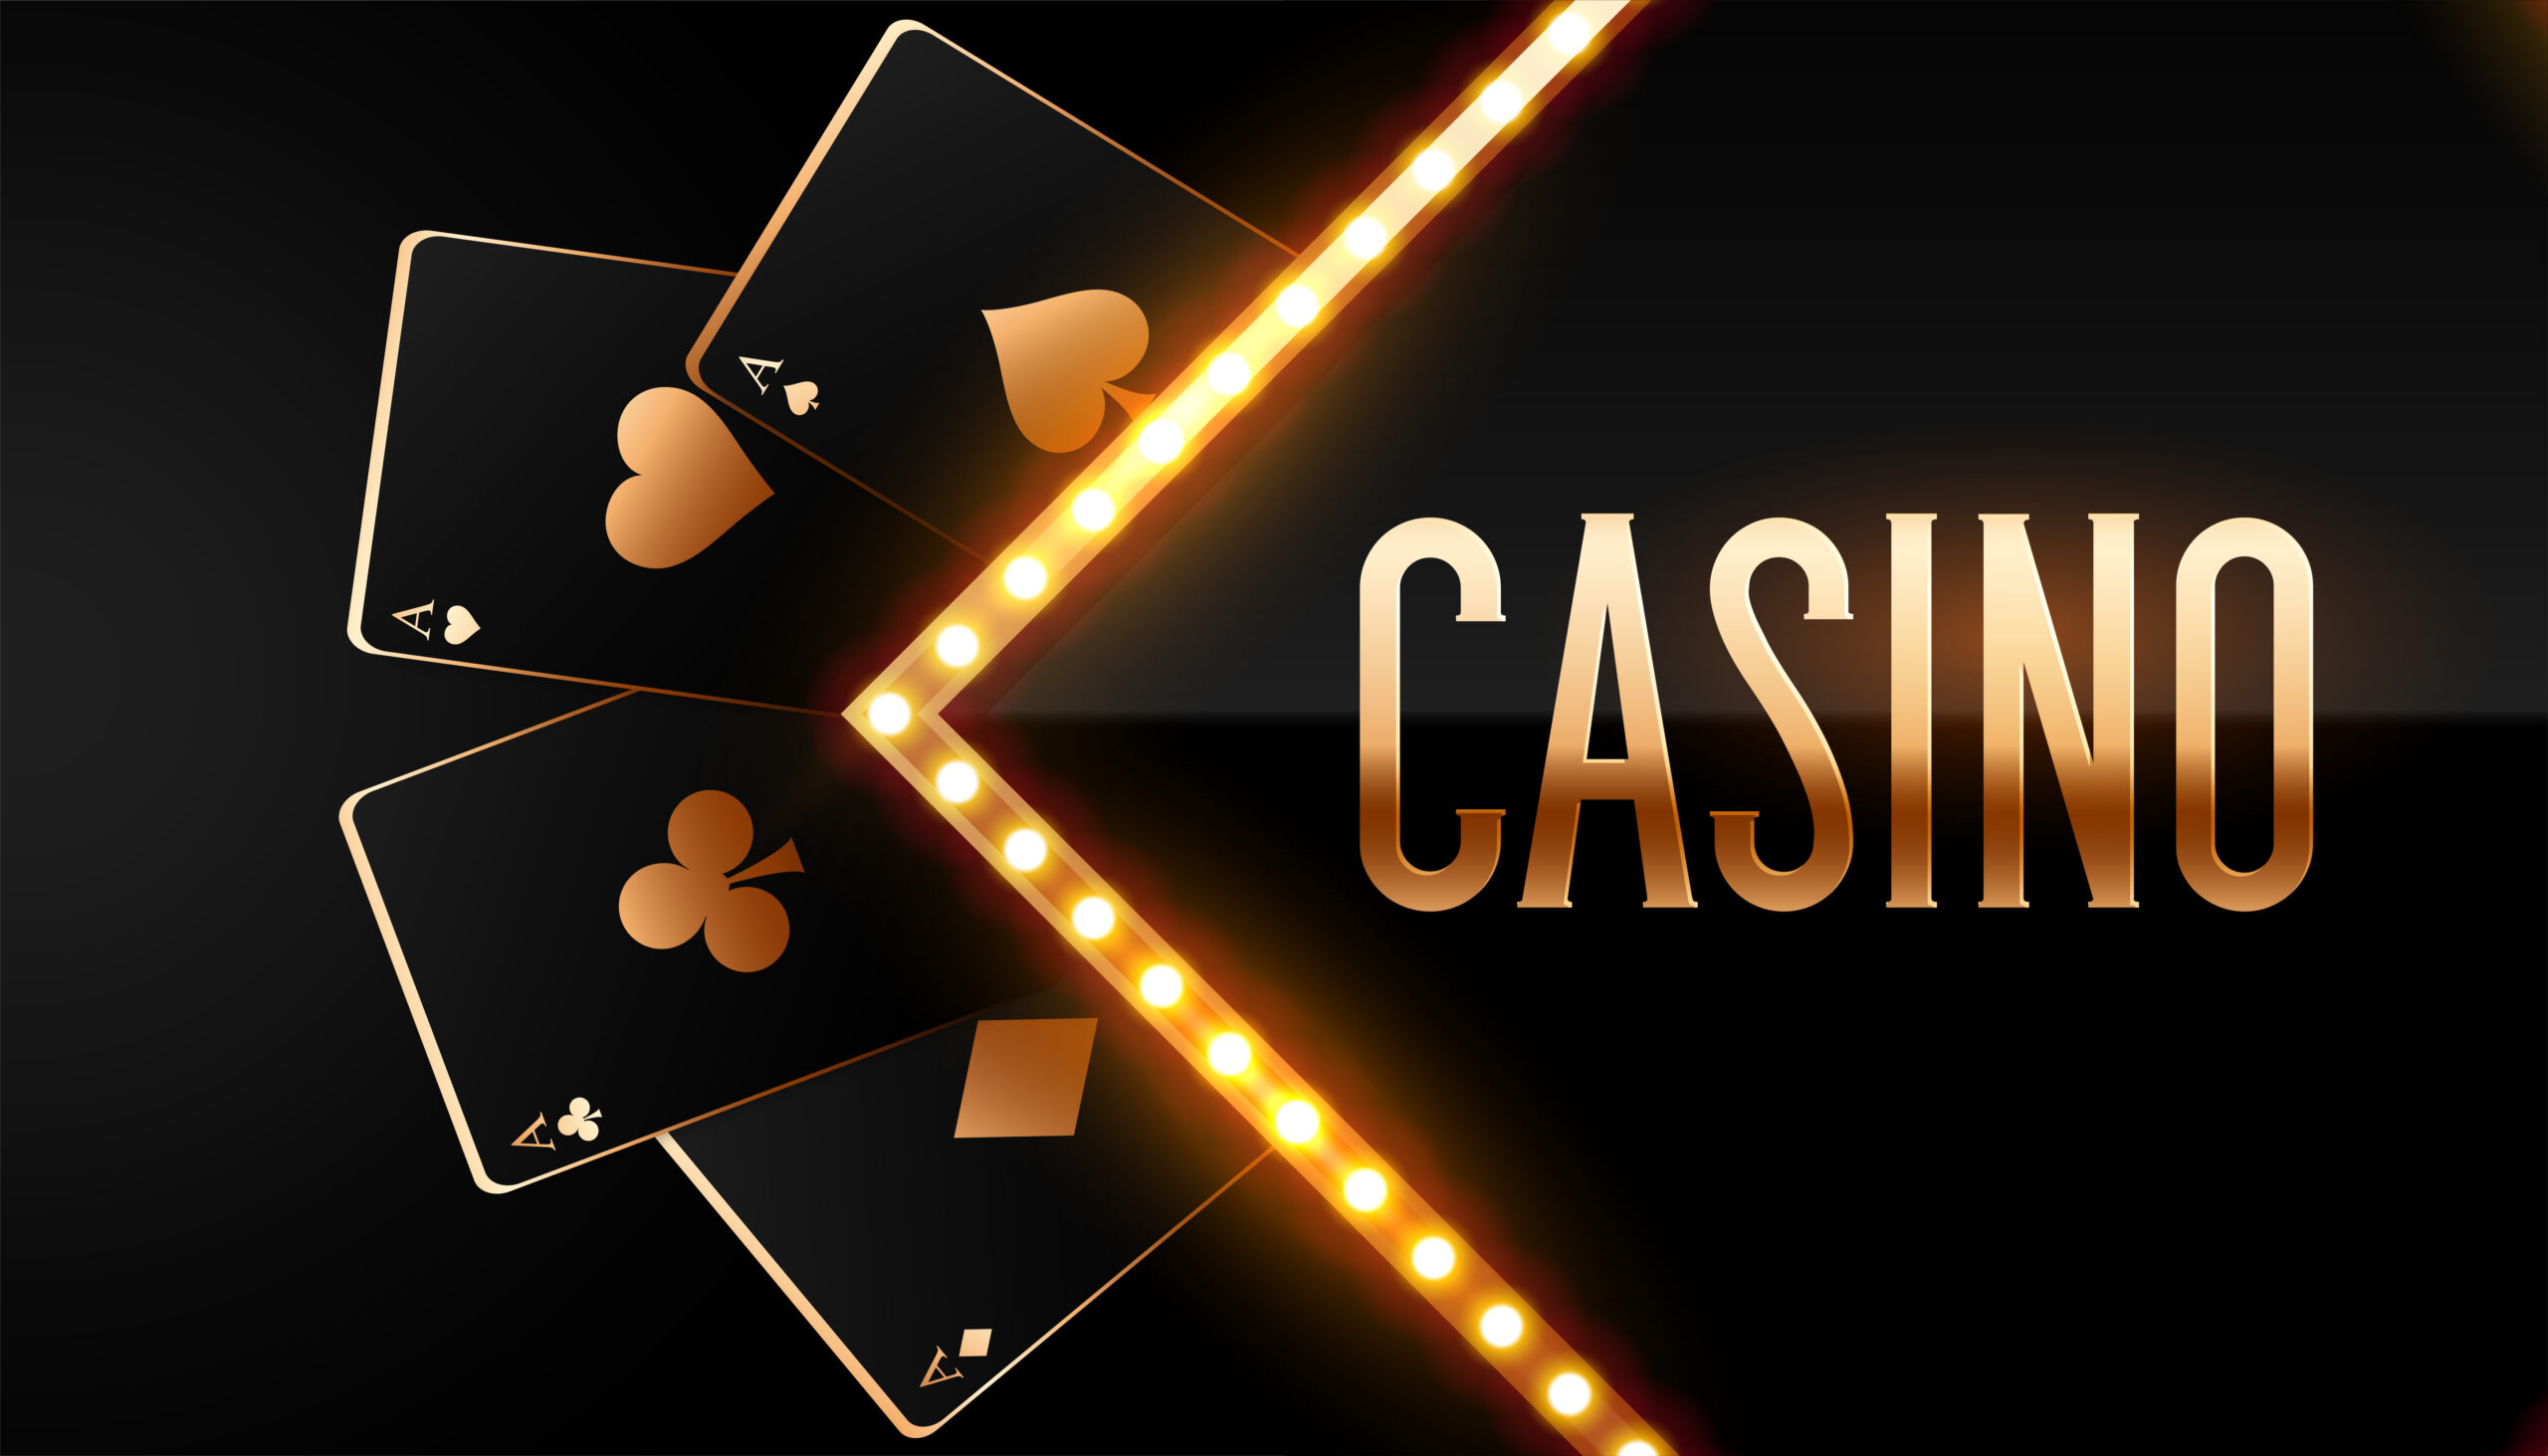 The Psychology Behind Casino Design: How They Keep You Playing